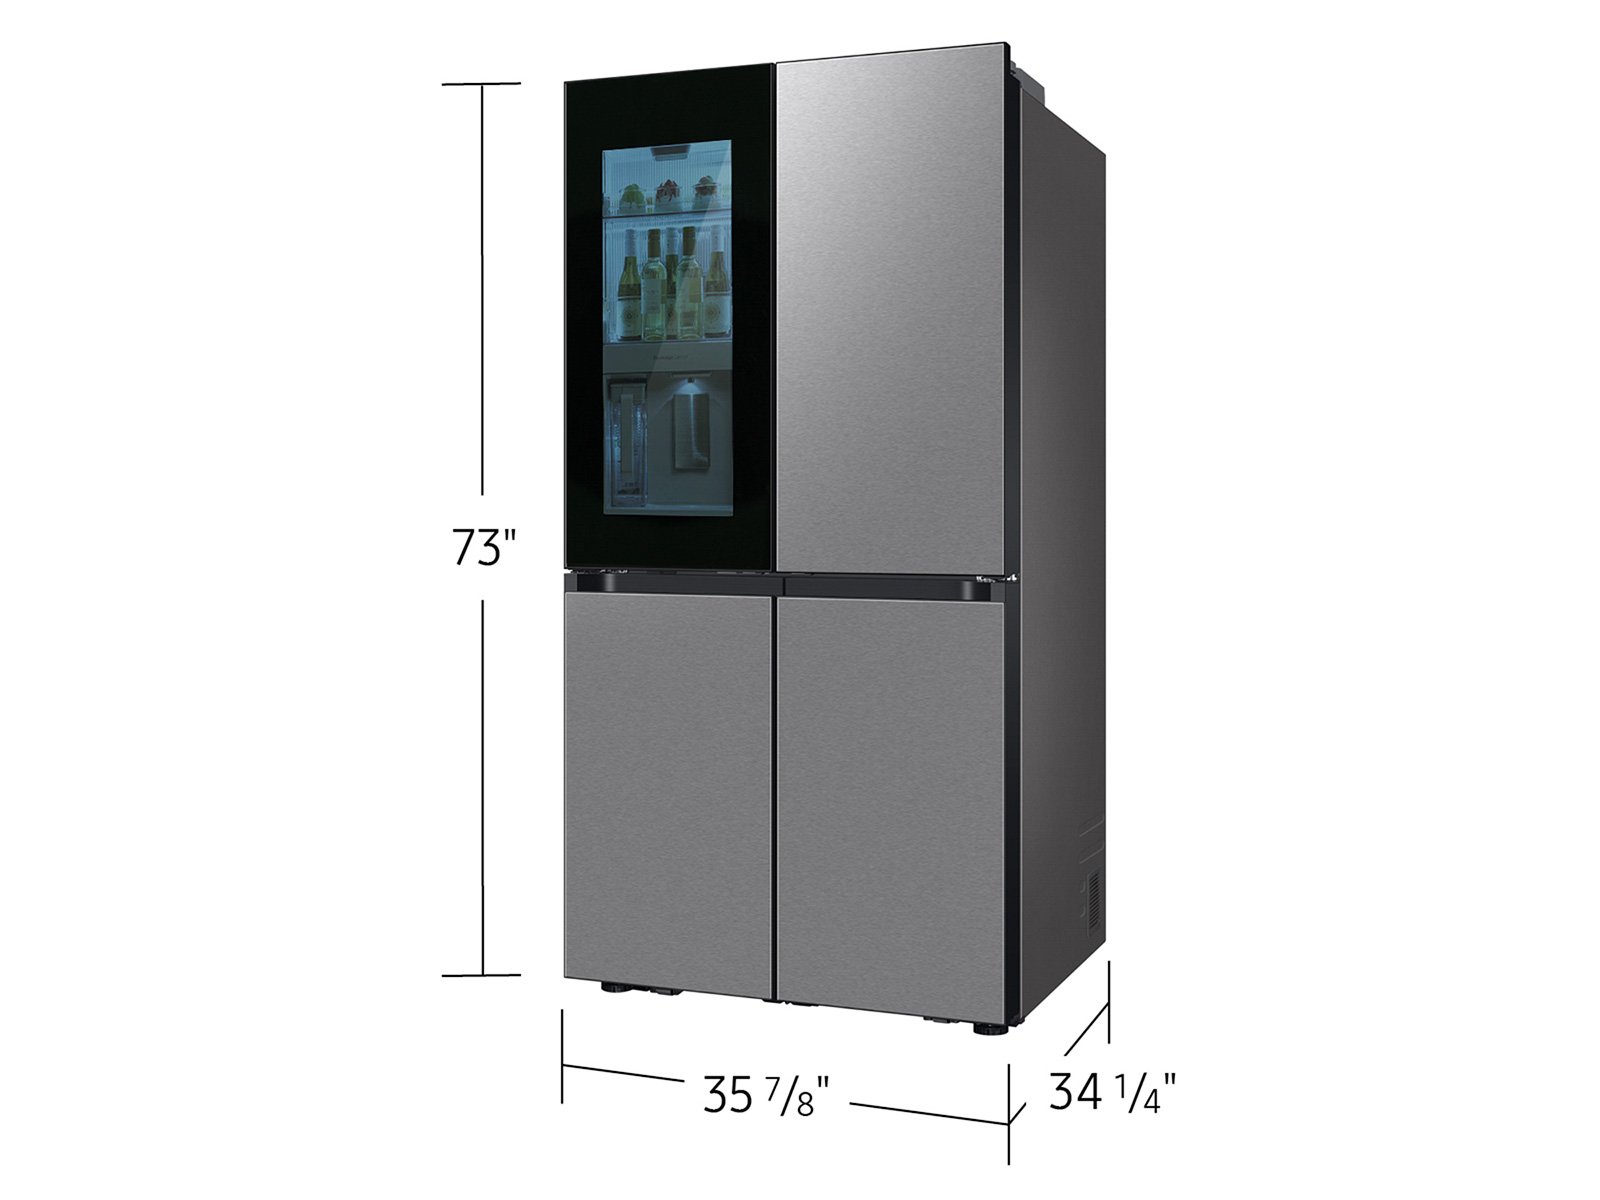 Thumbnail image of Bespoke 4-Door Flex&trade; Refrigerator (29 cu. ft.) with Beverage Zone&trade; and Auto Open Door in White Glass